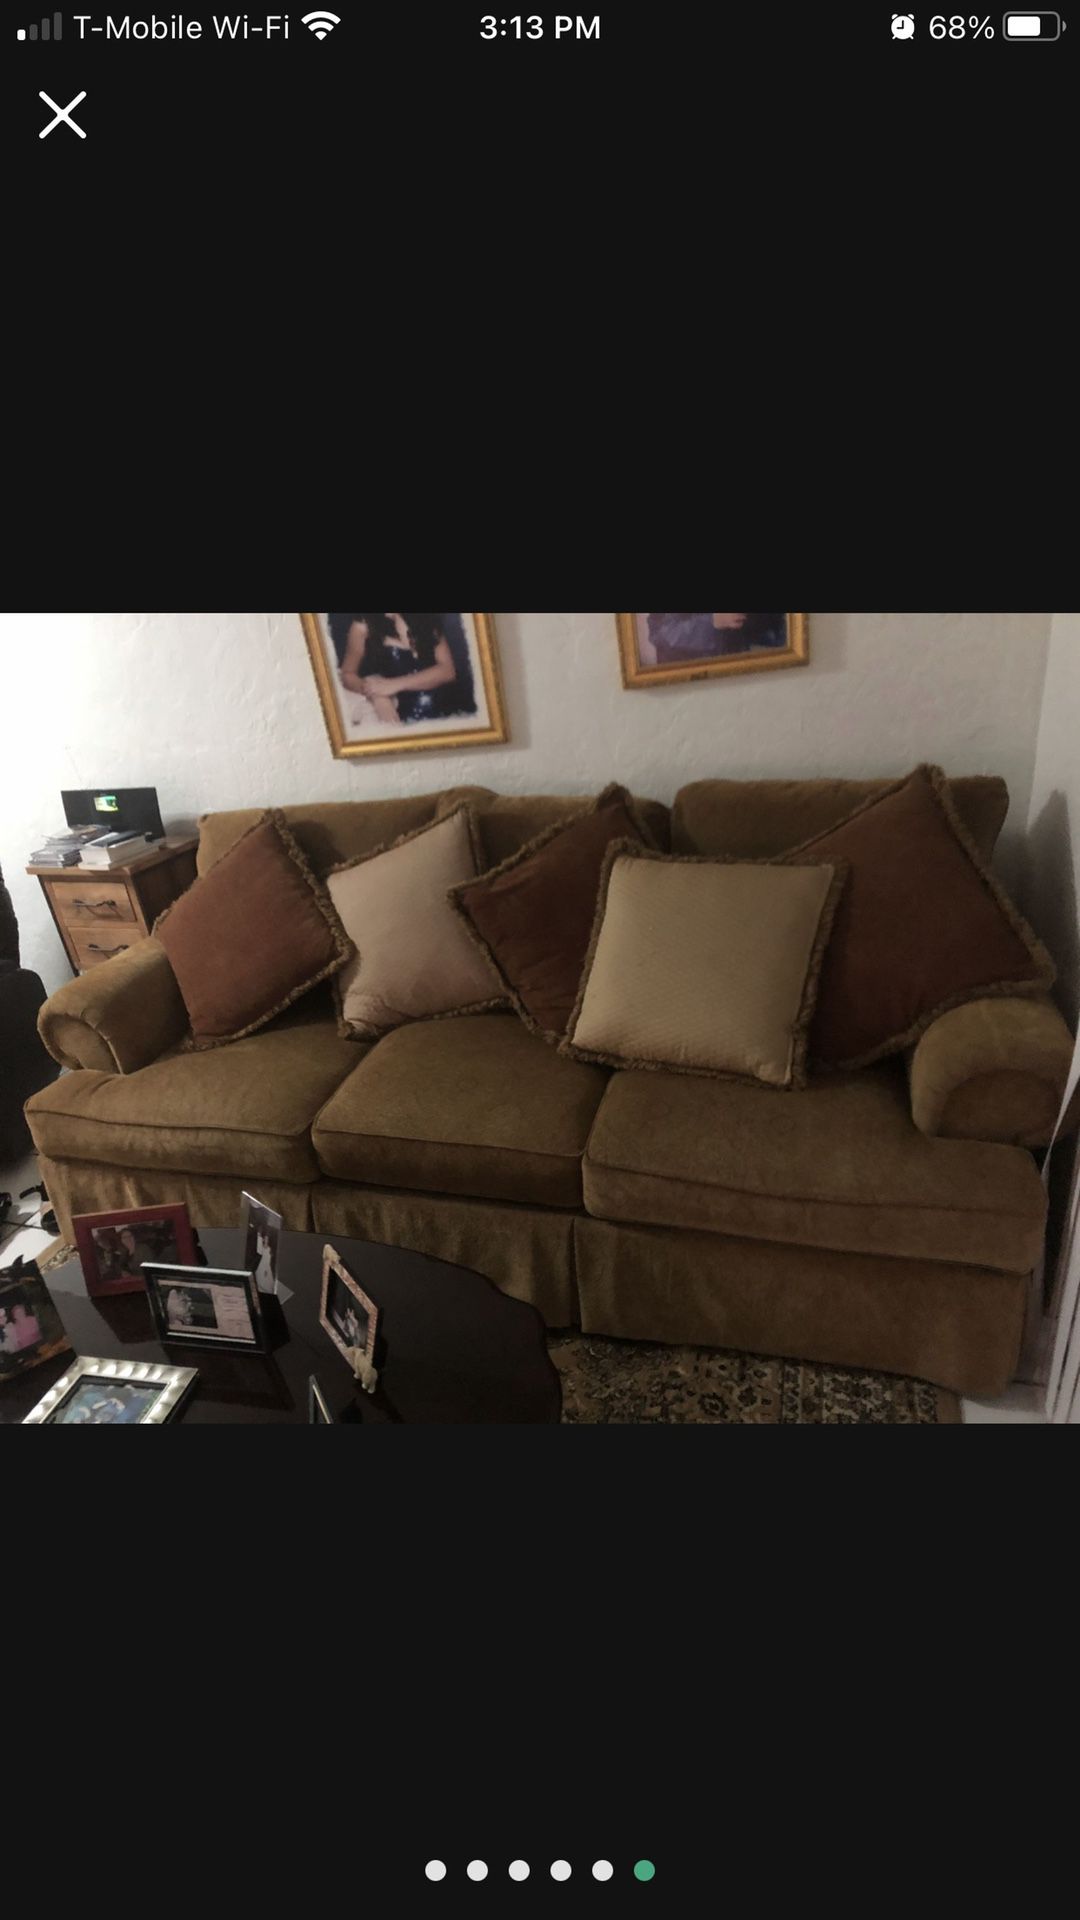  FREE Need Gone TODAY!!!  $0.00 2 ppl to carry its Big… Reduced!!$380.00  Big Sofa & Oversized Chair Impecable was “The Formal Living Room Set” 